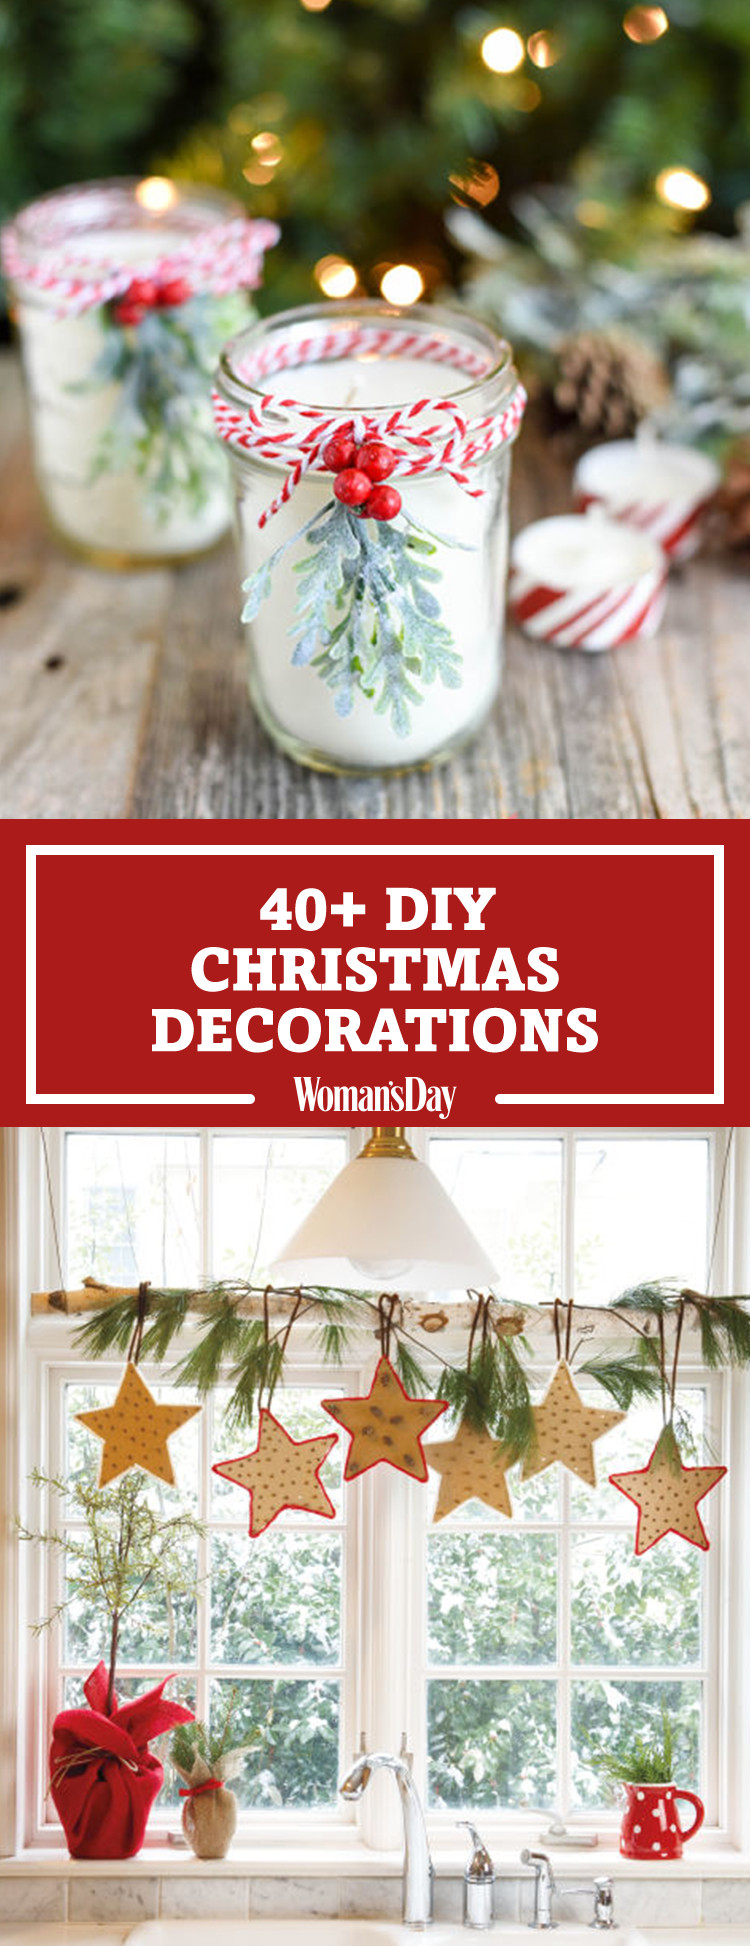 DIY Christmas Projects
 47 Easy DIY Christmas Decorations Homemade Ideas for